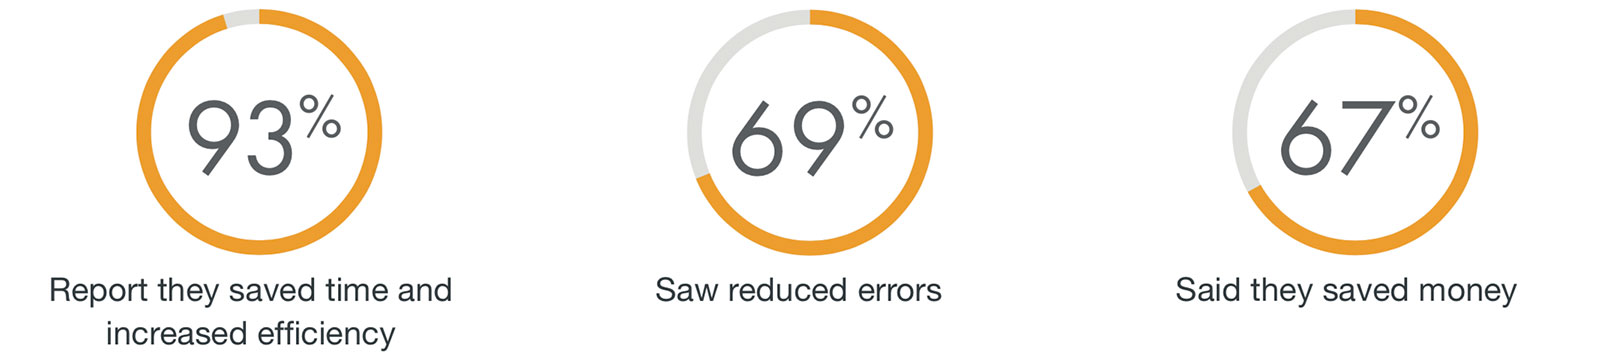 93 percent report they saved time and money. 69 percent saw reduced errors. 67 percent said they saved money.